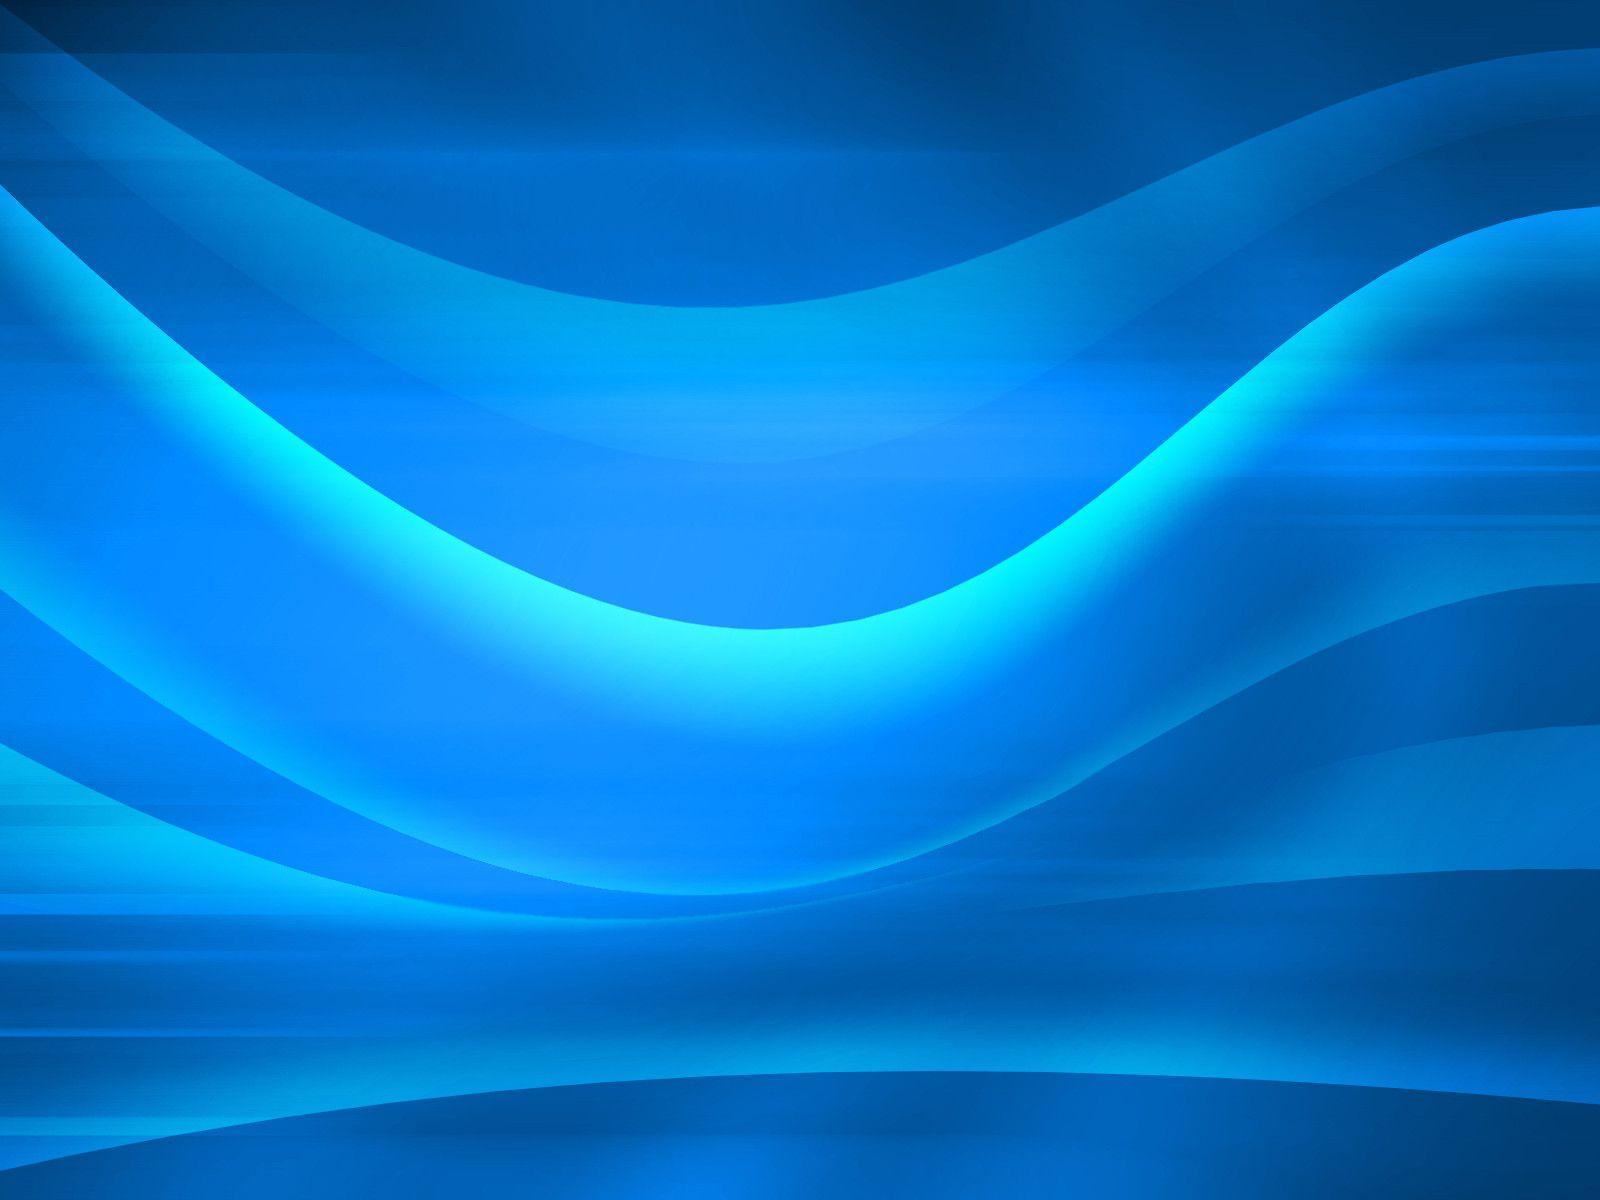 Blue Wave Abstract Wallpaper. Piccry.com: Picture Idea Gallery